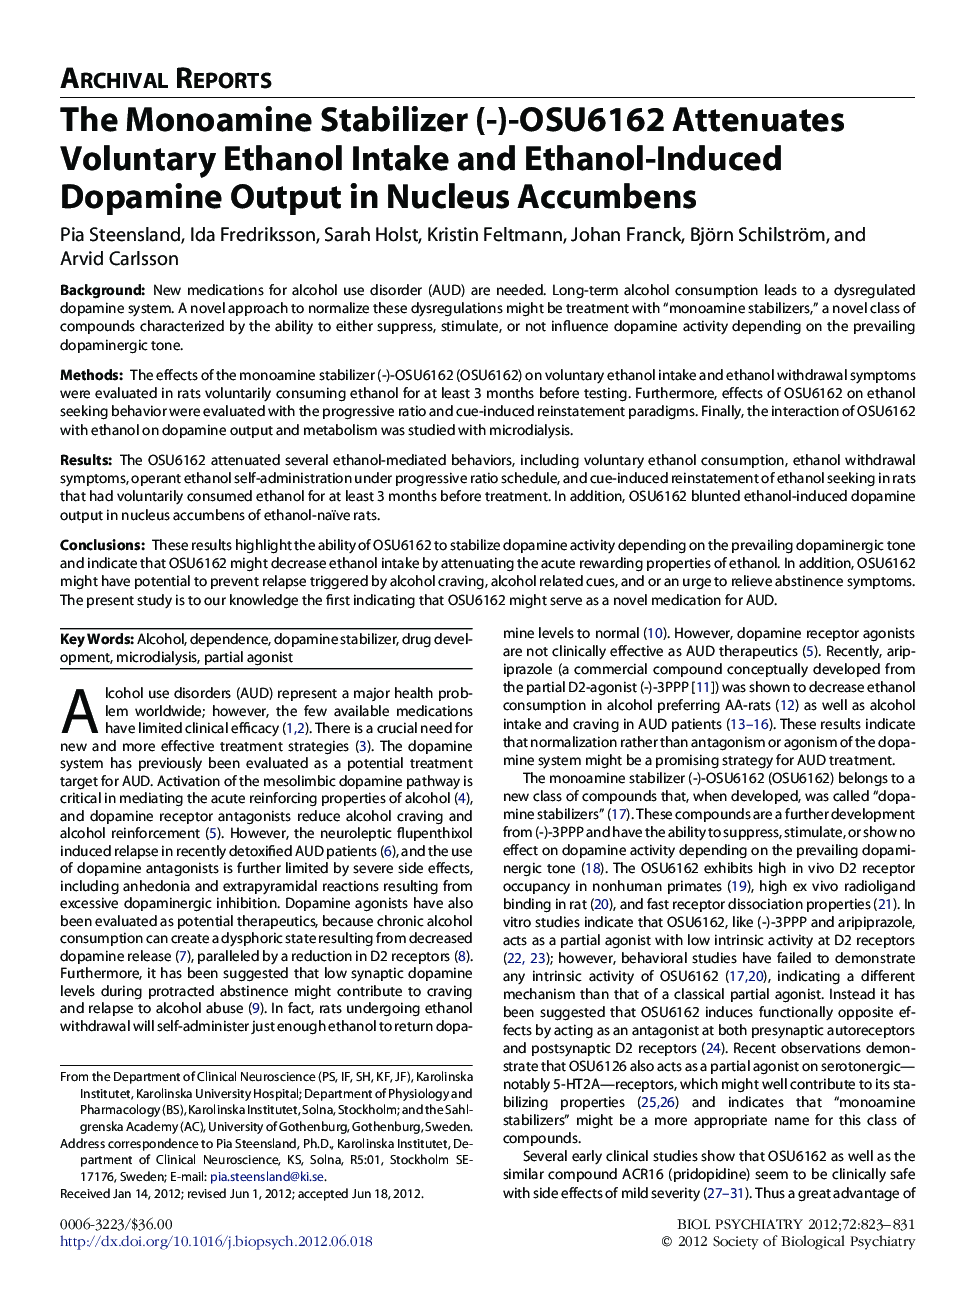 The Monoamine Stabilizer (-)-OSU6162 Attenuates Voluntary Ethanol Intake and Ethanol-Induced Dopamine Output in Nucleus Accumbens